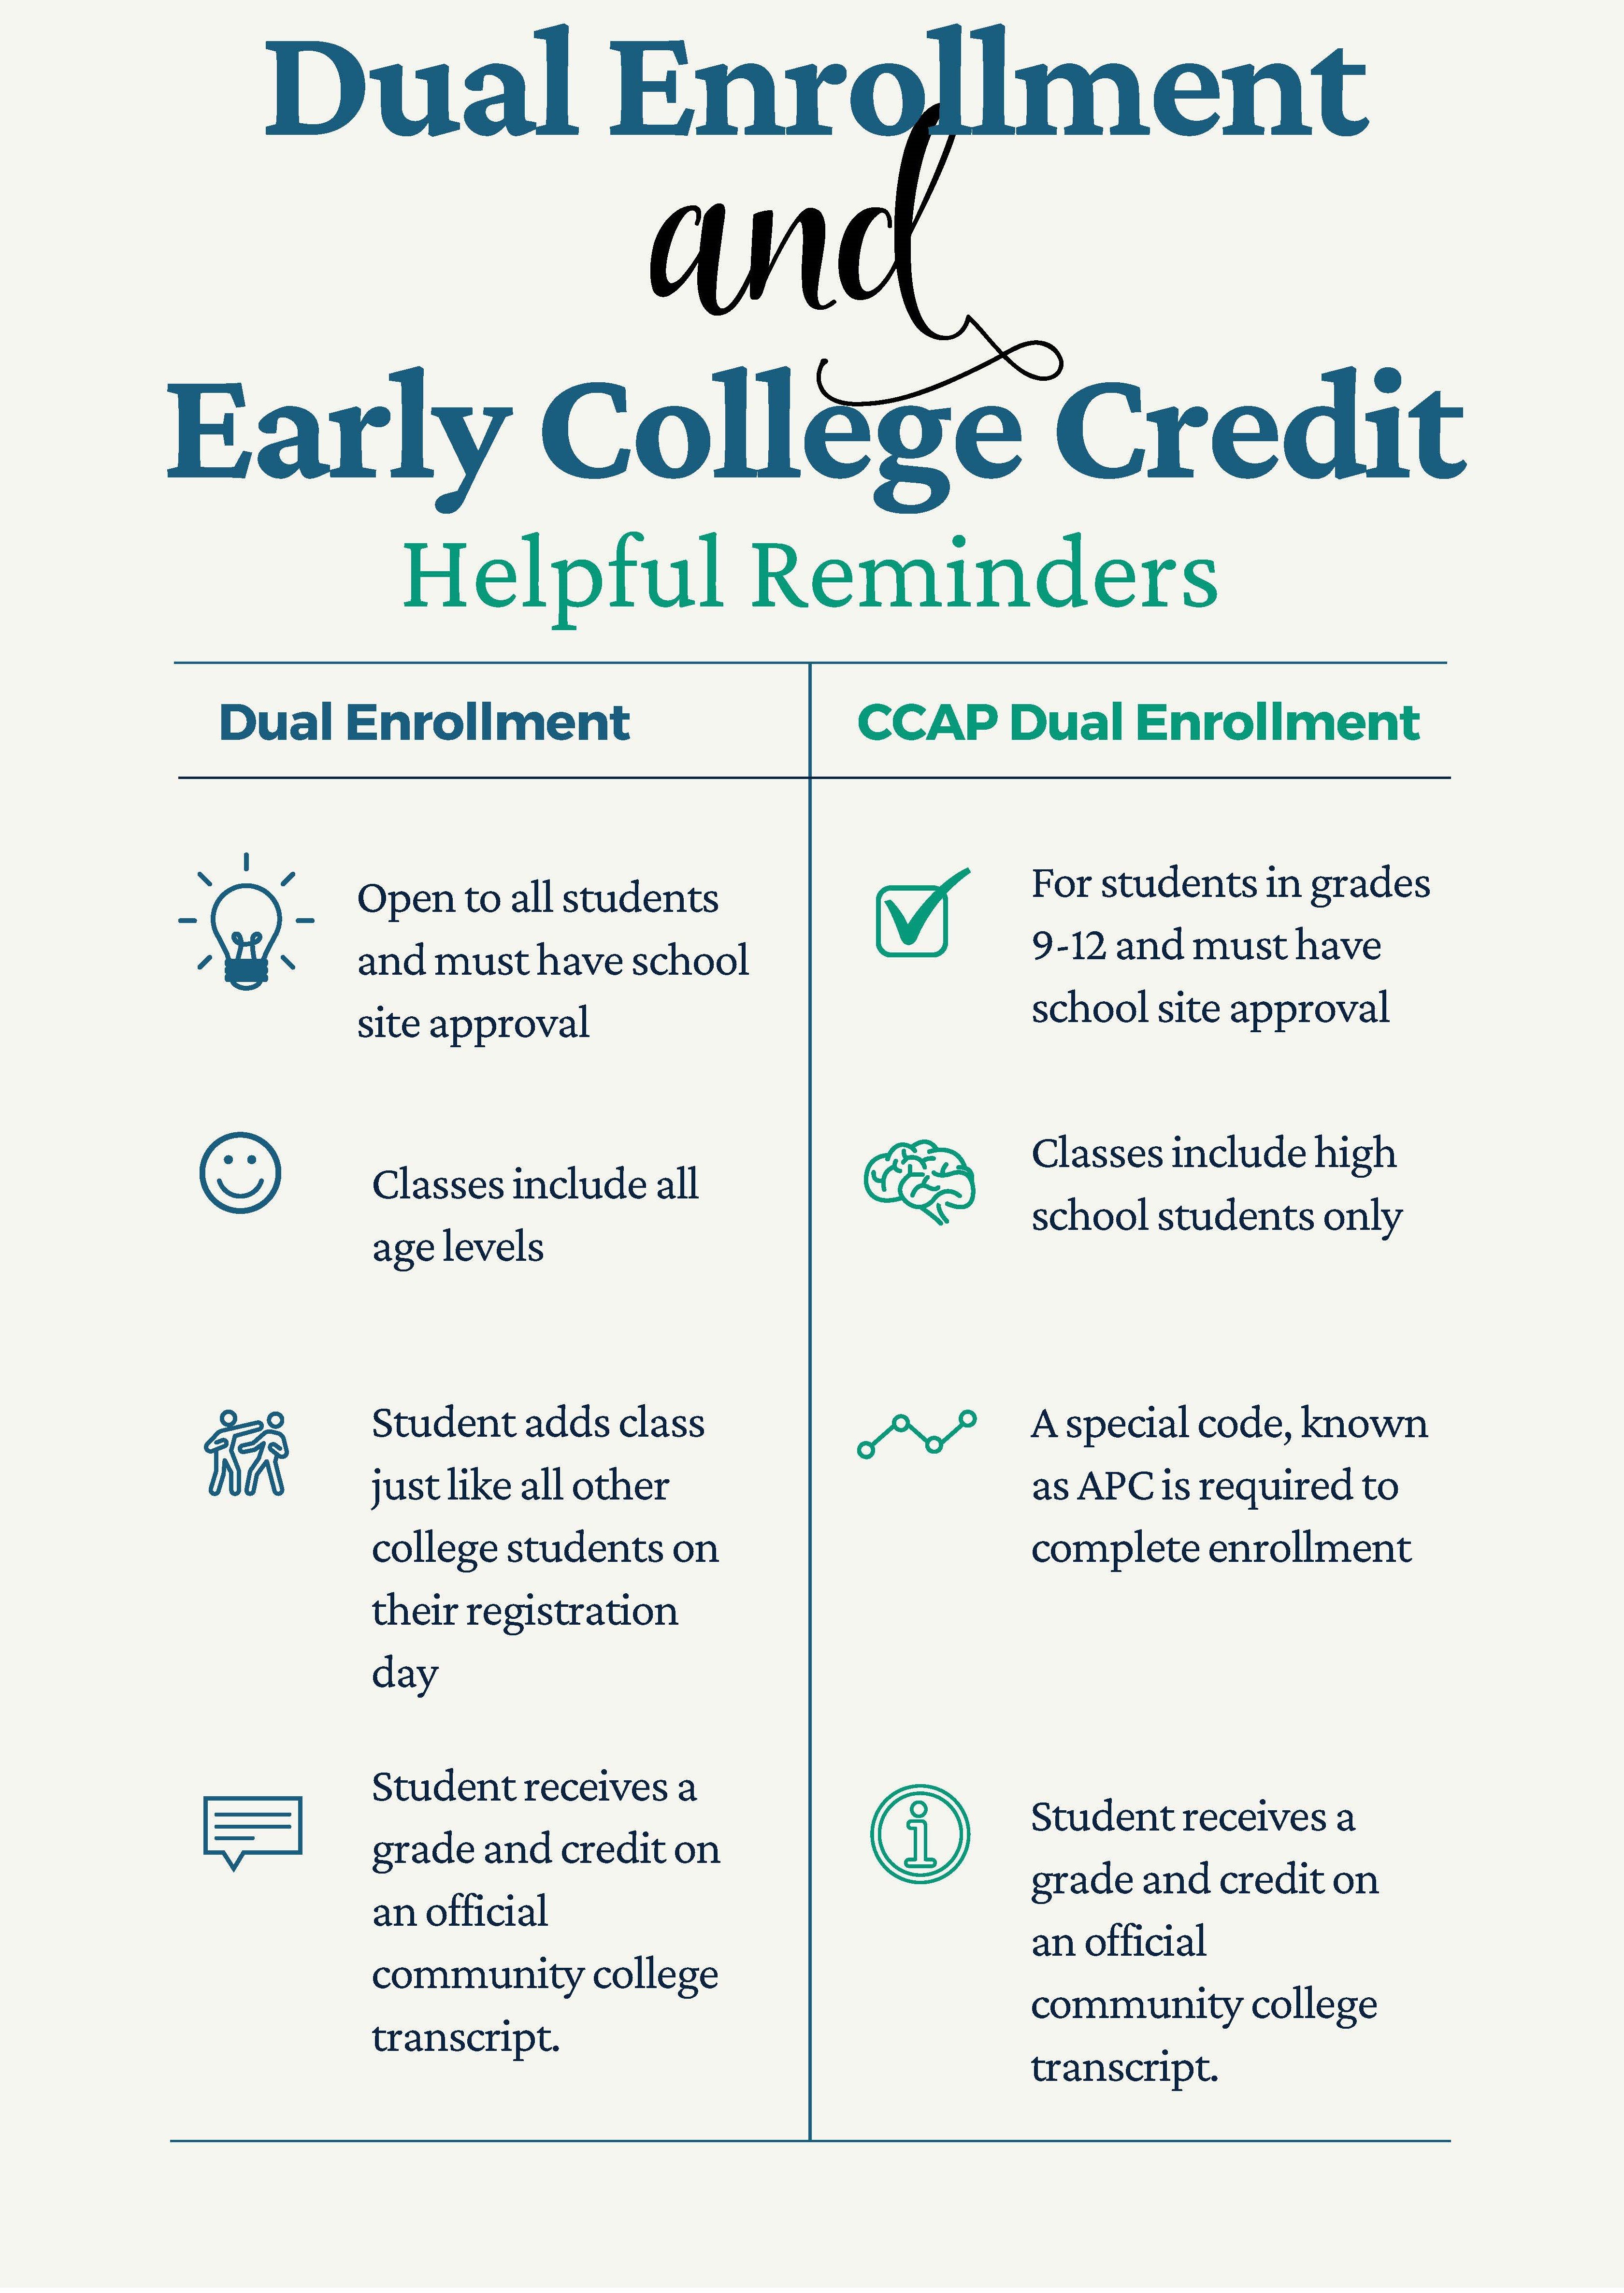 Dual Enrollment and Early College Credit